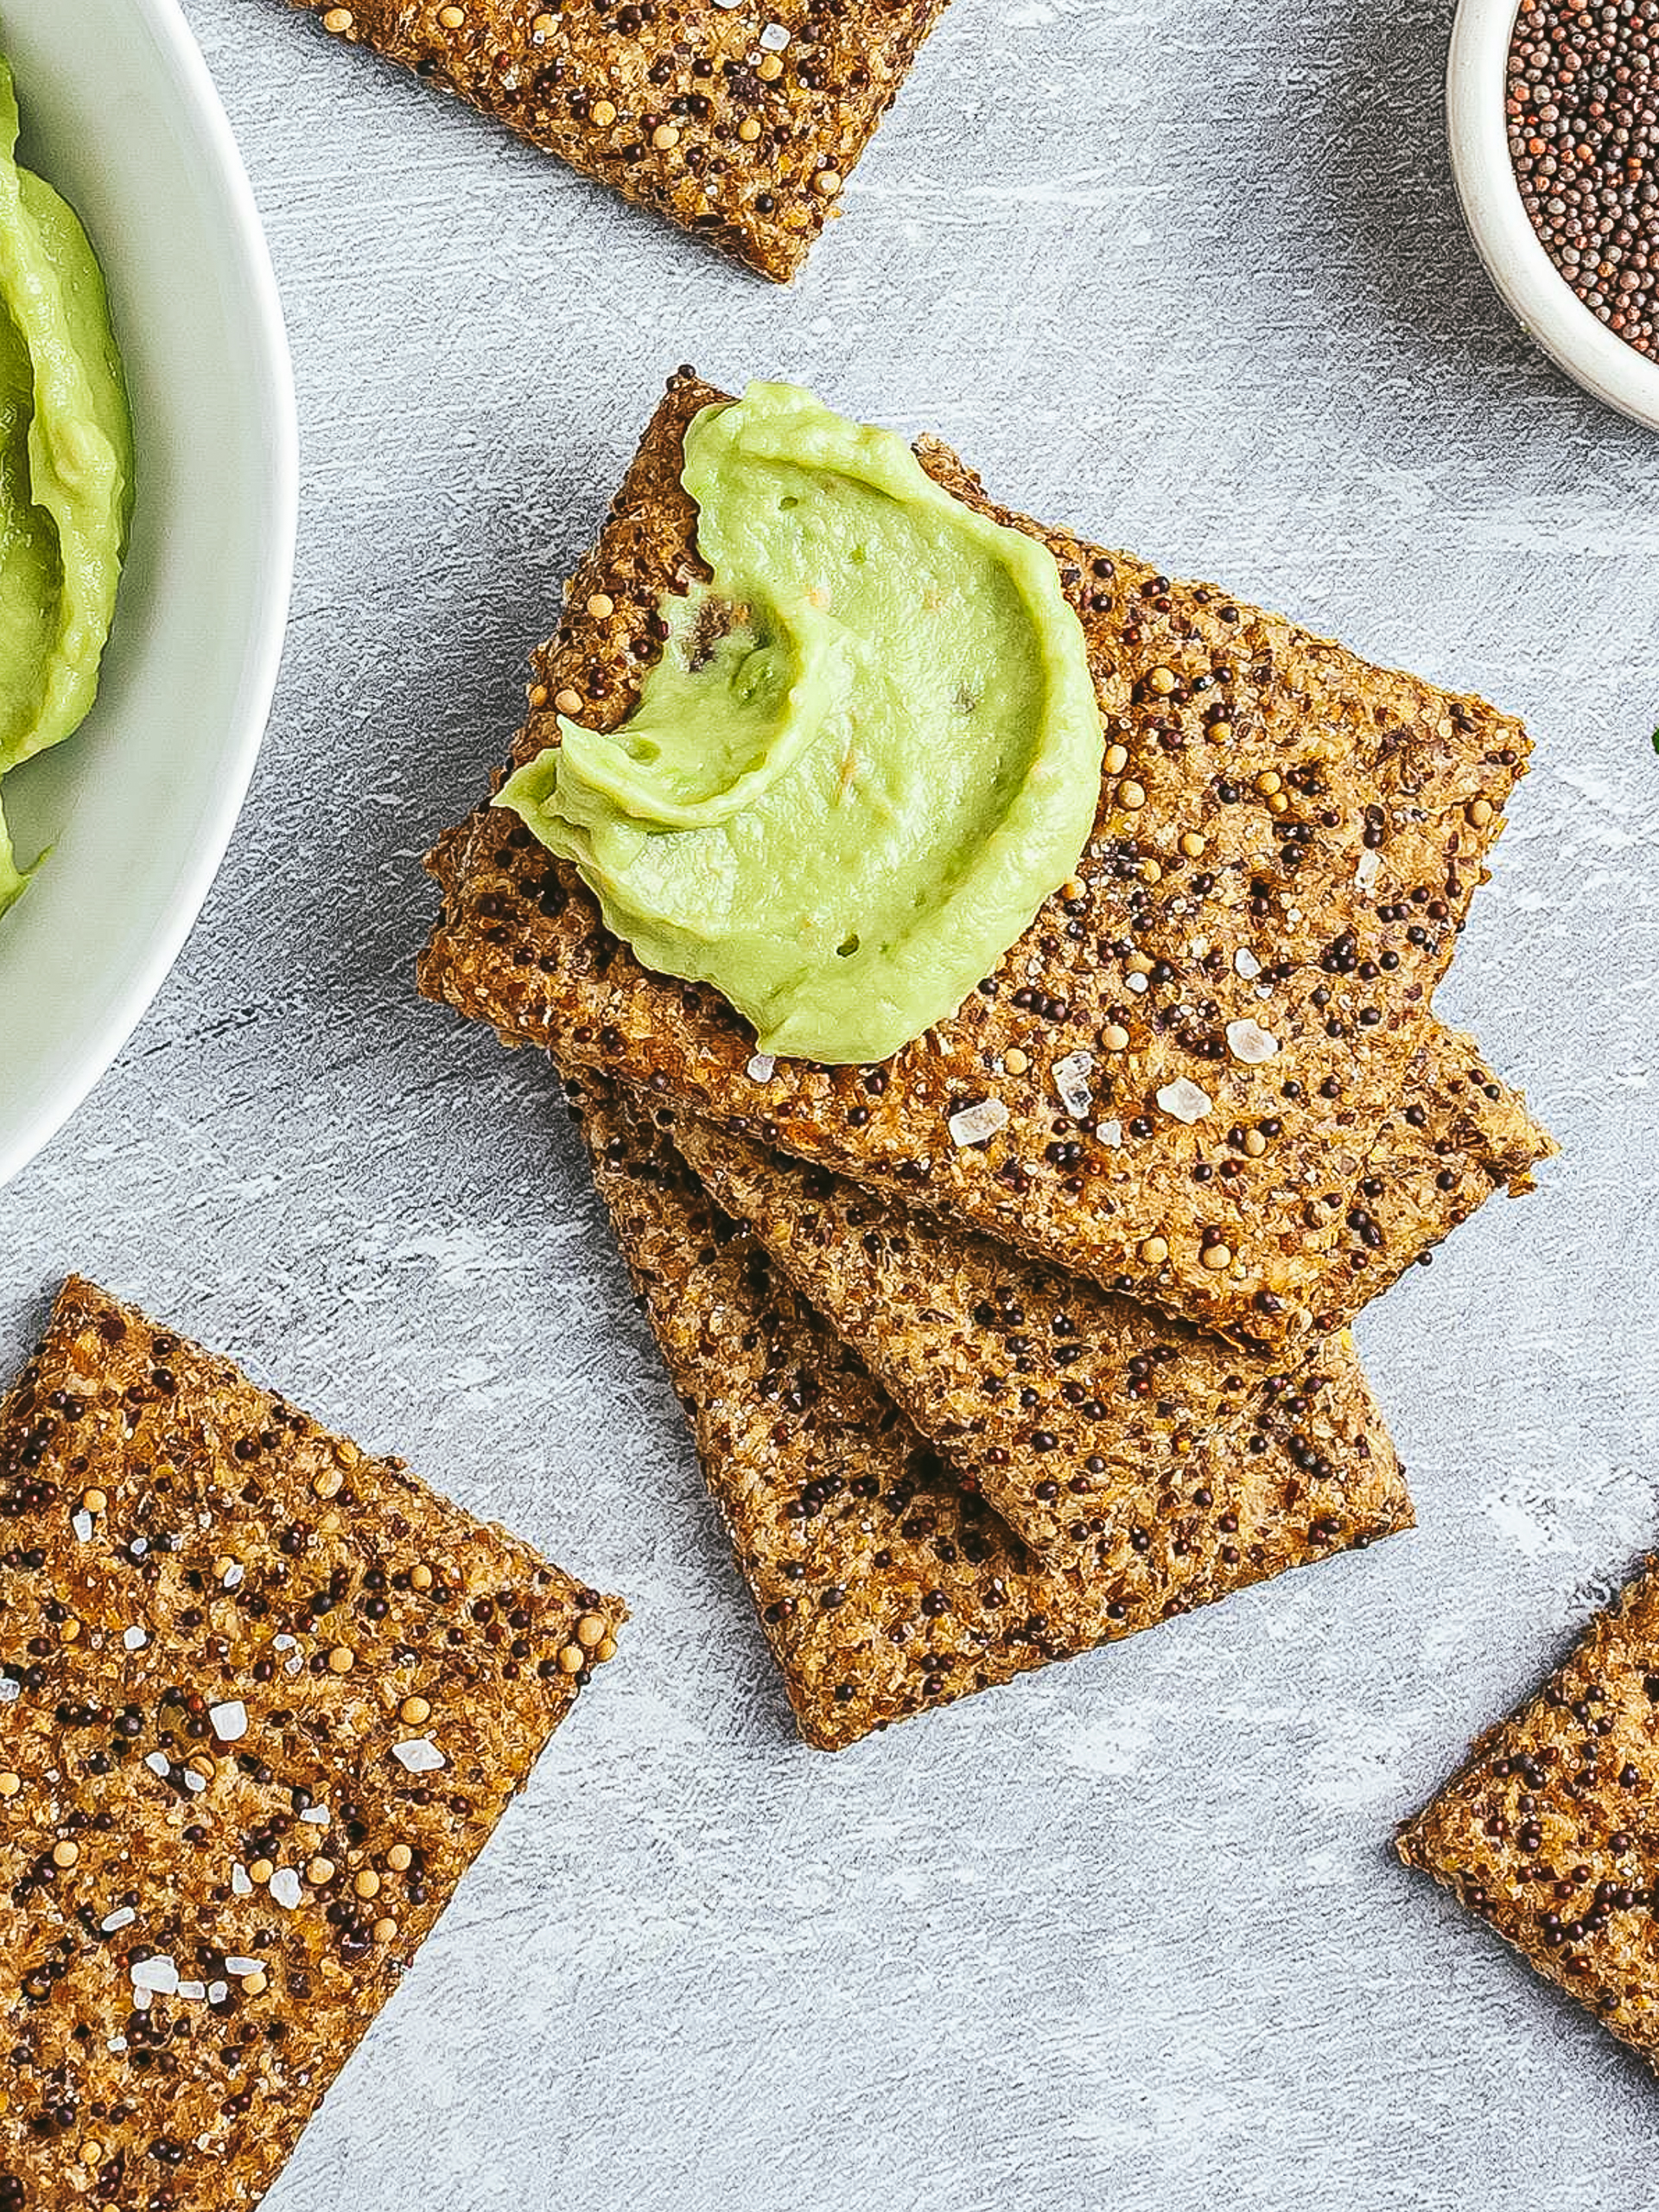 7 High-Protein, Filling Snacks for Weight Loss